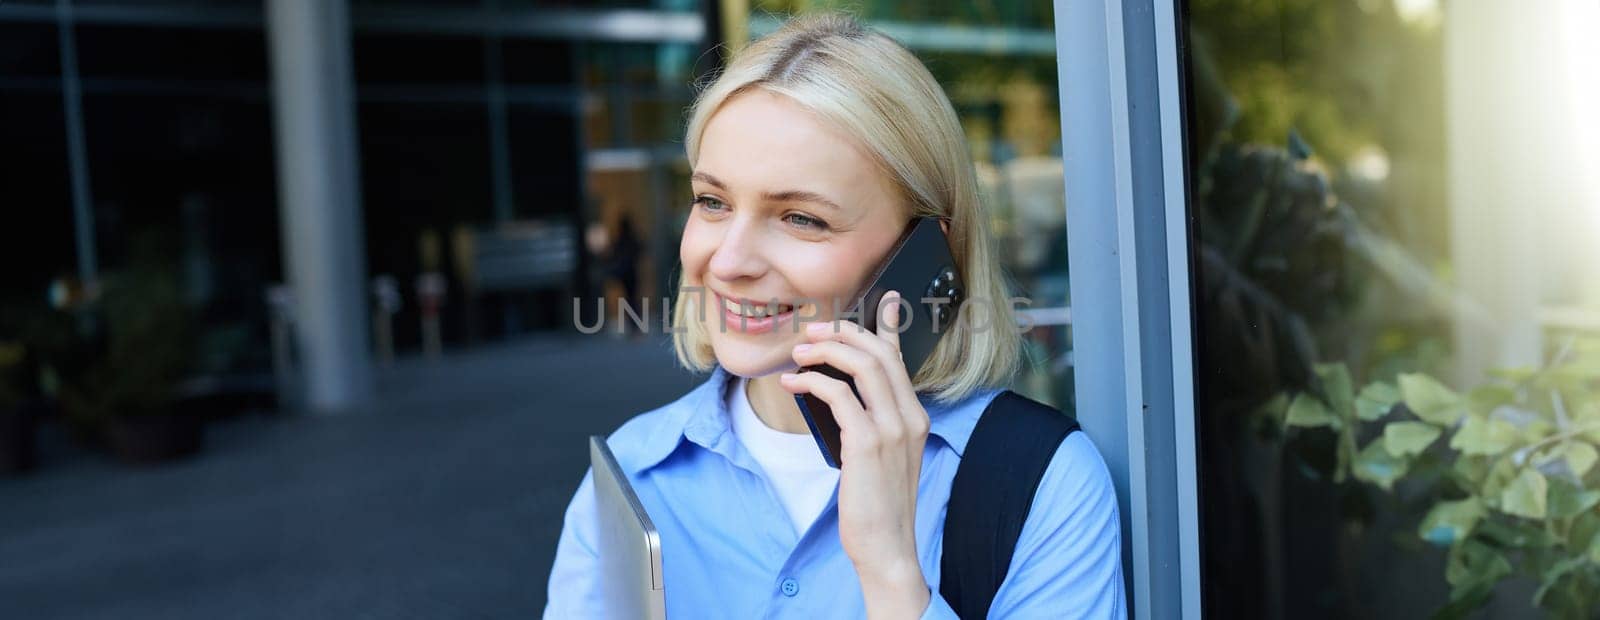 Portrait of young modern woman, office manager near building, standing outside with backpack, laptop, talking on mobile phone, chatting on smartphone. Lifestyle and communication concept